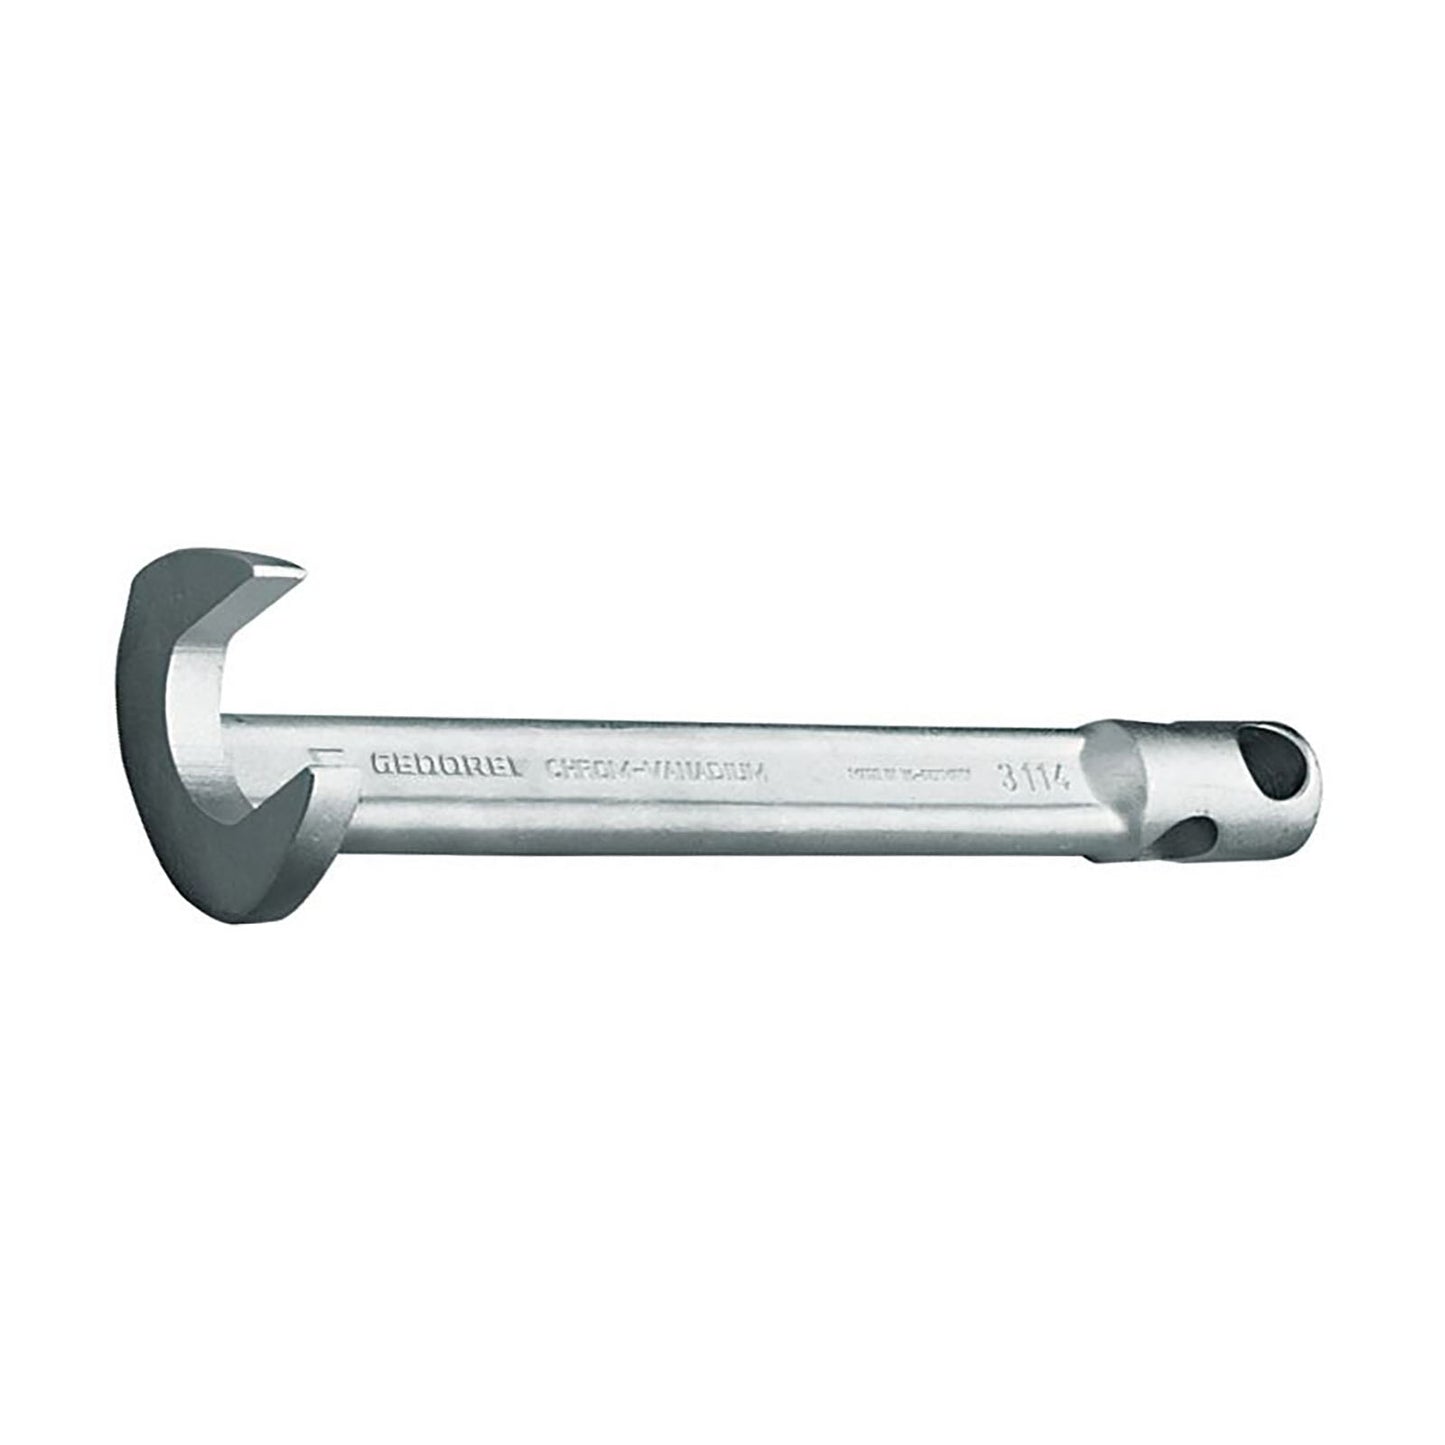 GEDORE 3114 21 - Forked Foot Wrench, 21mm (6677140)